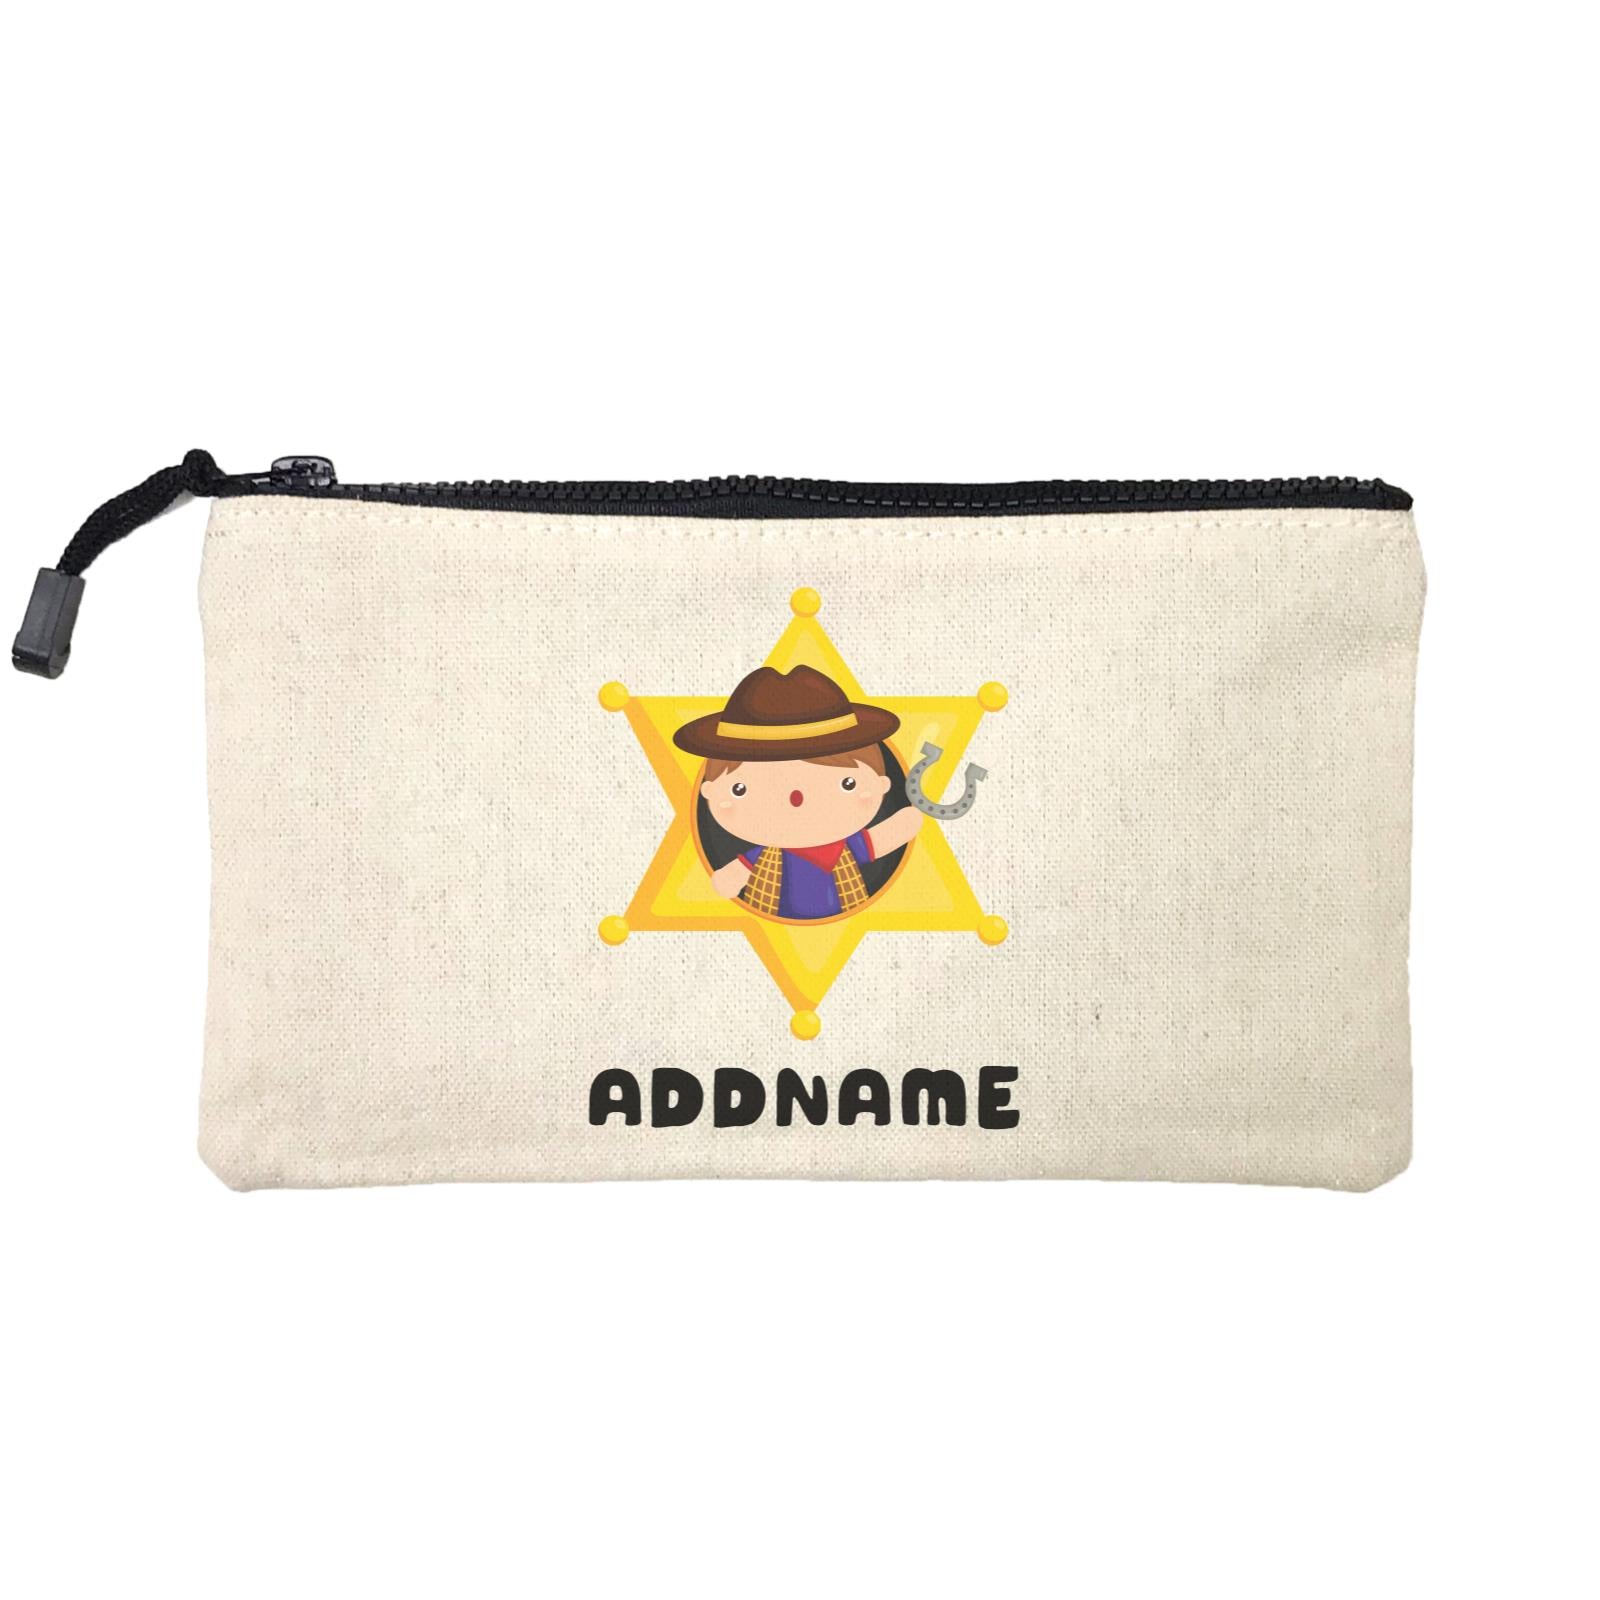 Birthday Cowboy Style Little Cowboy Holding Hoe In Star Badge Addname Mini Accessories Stationery Pouch